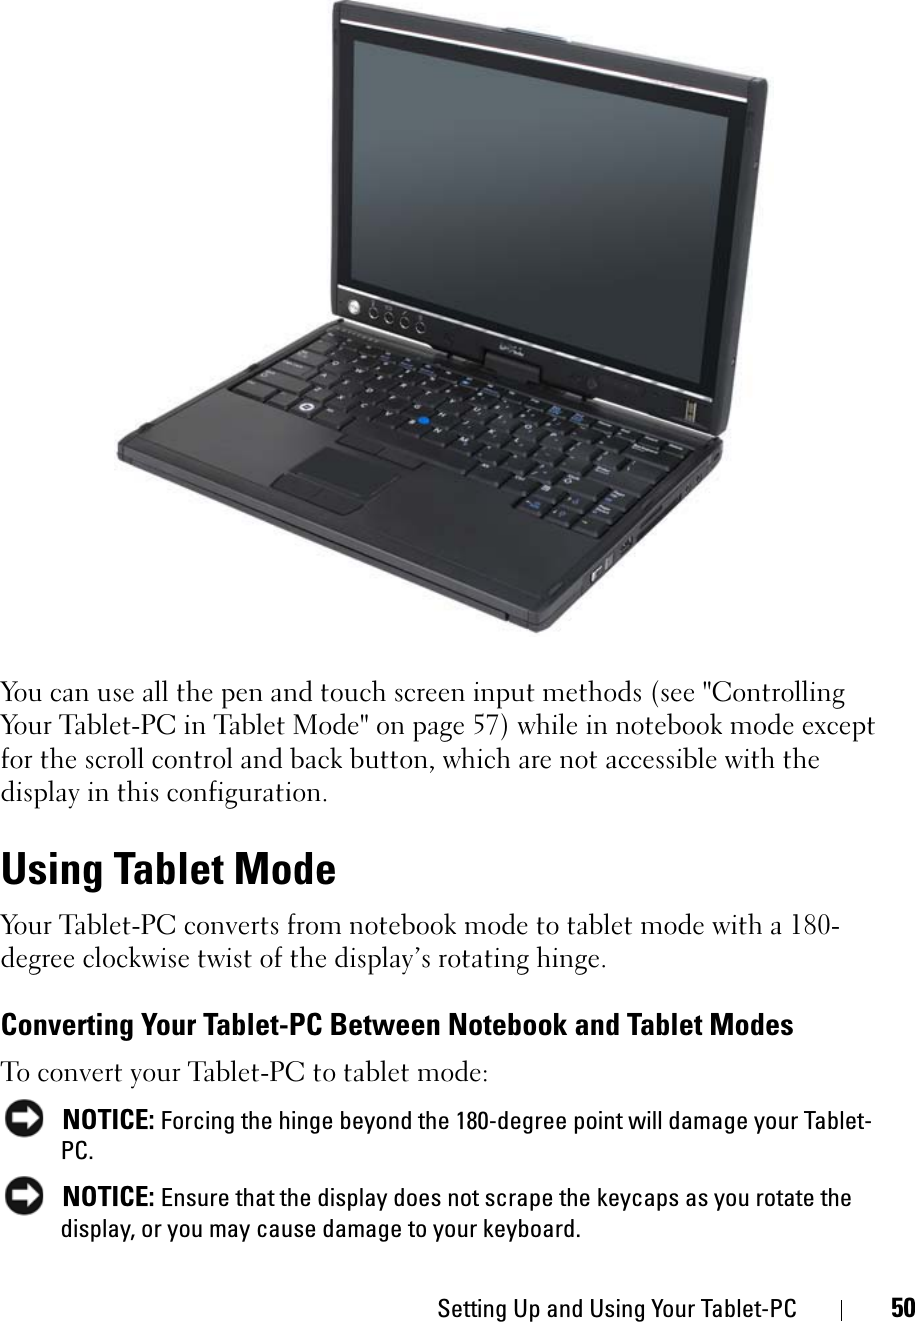 Setting Up and Using Your Tablet-PC 50You can use all the pen and touch screen input methods (see &quot;Controlling Your Tablet-PC in Tablet Mode&quot; on page 57) while in notebook mode except for the scroll control and back button, which are not accessible with the display in this configuration. Using Tablet ModeYour Tablet-PC converts from notebook mode to tablet mode with a 180-degree clockwise twist of the display’s rotating hinge. Converting Your Tablet-PC Between Notebook and Tablet ModesTo convert your Tablet-PC to tablet mode:NOTICE: Forcing the hinge beyond the 180-degree point will damage your Tablet-PC.NOTICE: Ensure that the display does not scrape the keycaps as you rotate the display, or you may cause damage to your keyboard.